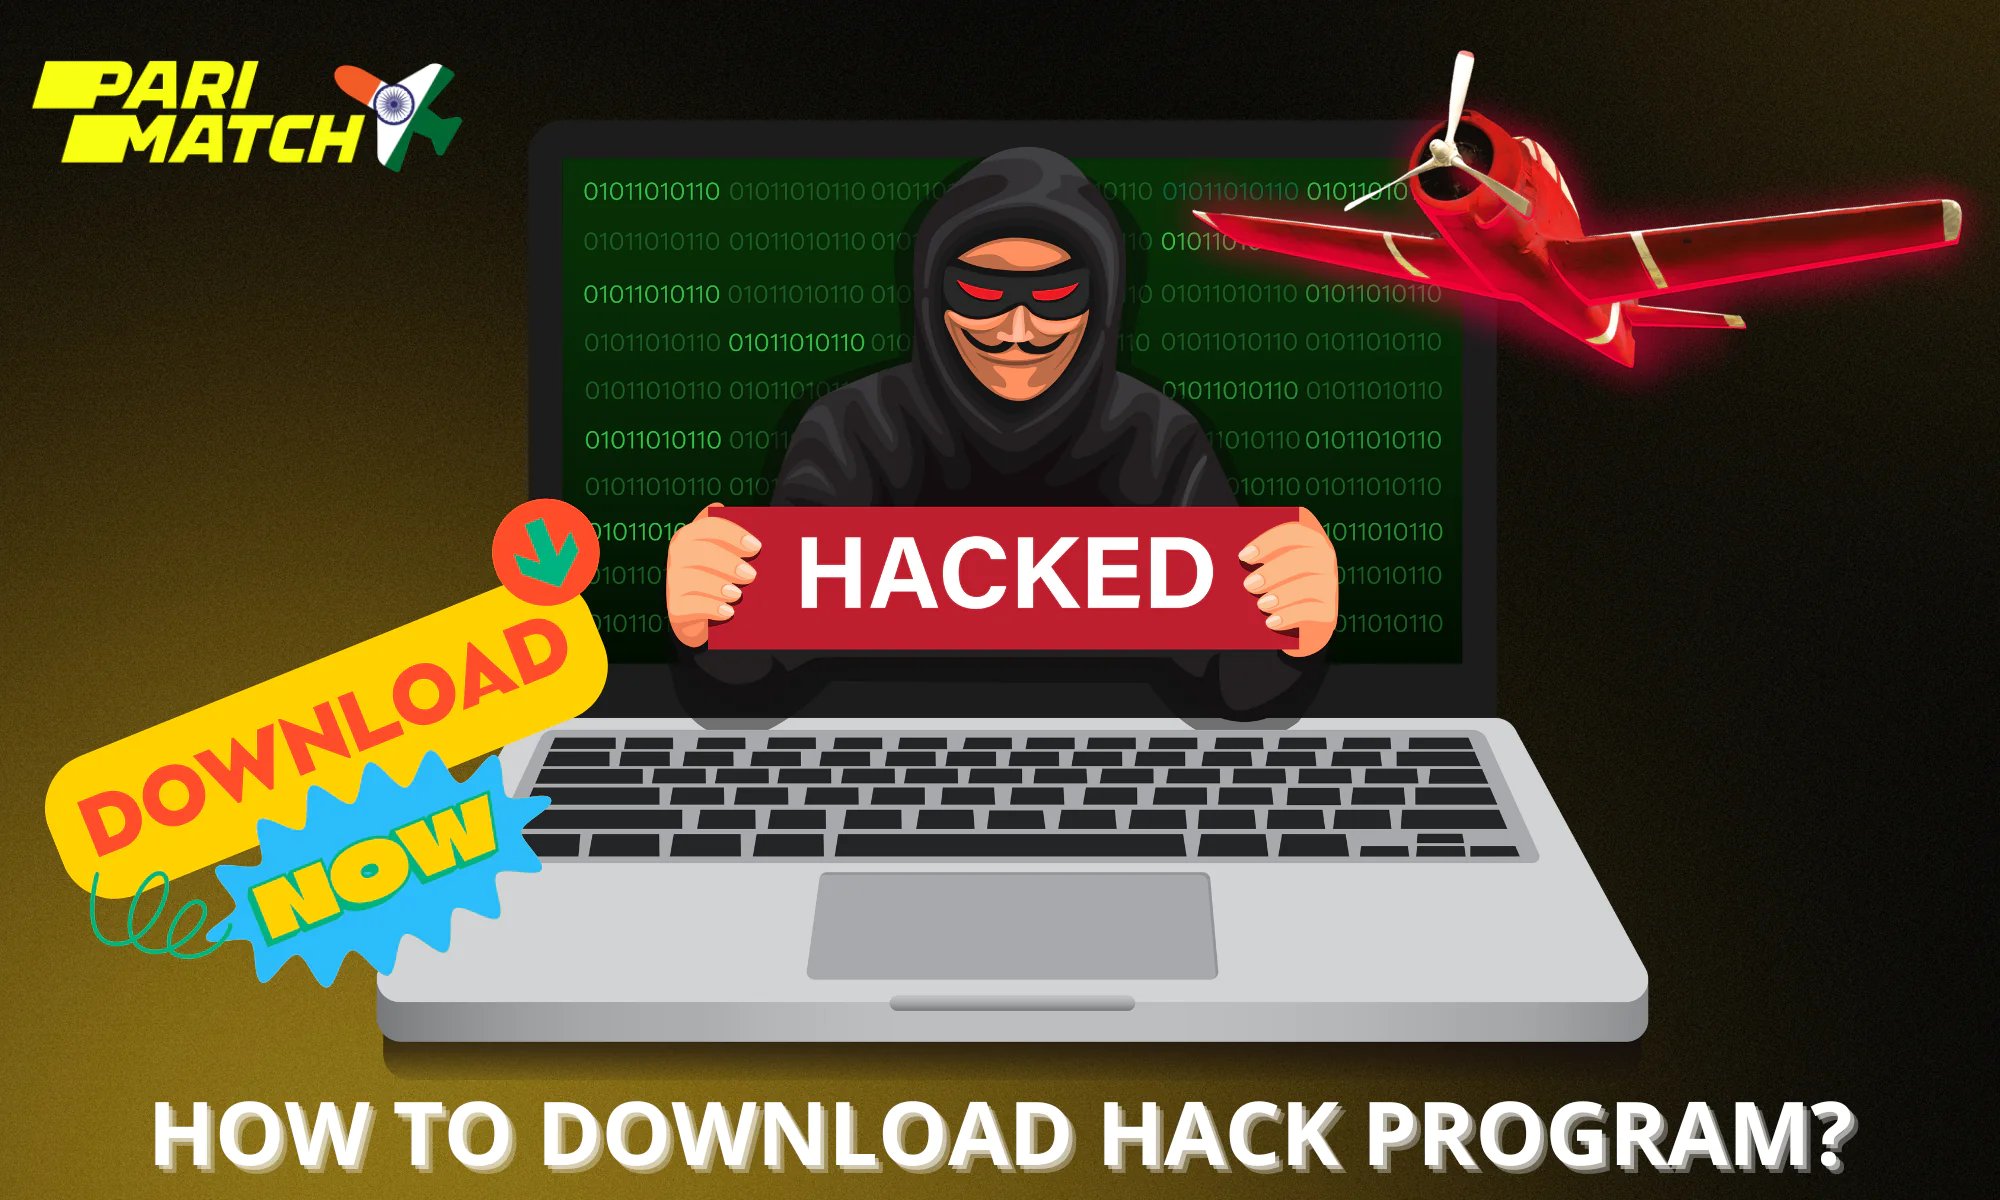 Step-by-step instructions on how to download Parimatch Aviator hacking software